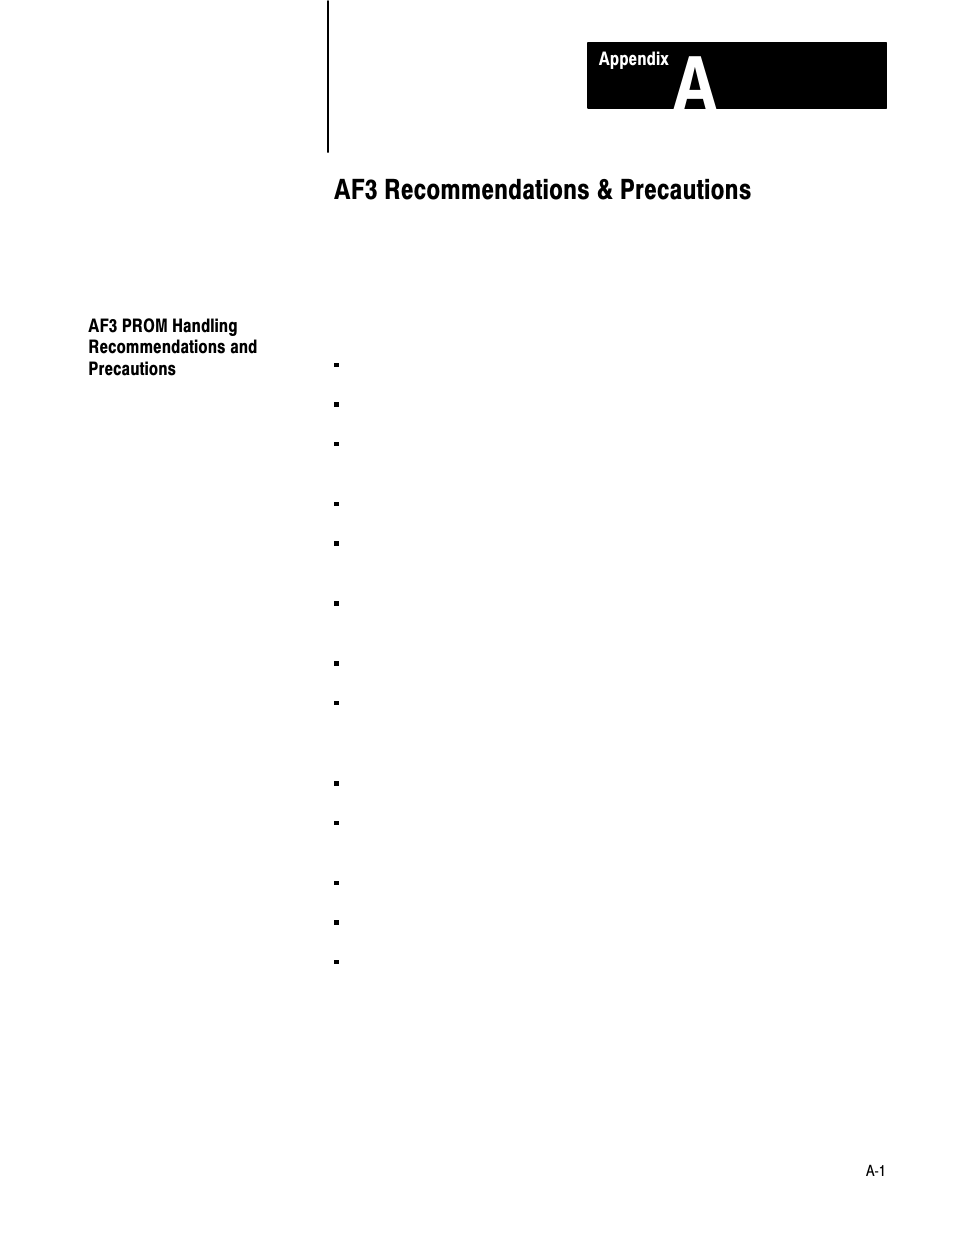 1772-6.5.2, a - recommendations and precautions, Af3 recommendations & precautions | Rockwell Automation 1772-AF3,D17726.5.2 User Manual AUX FUNCT PROM User Manual | Page 30 / 32